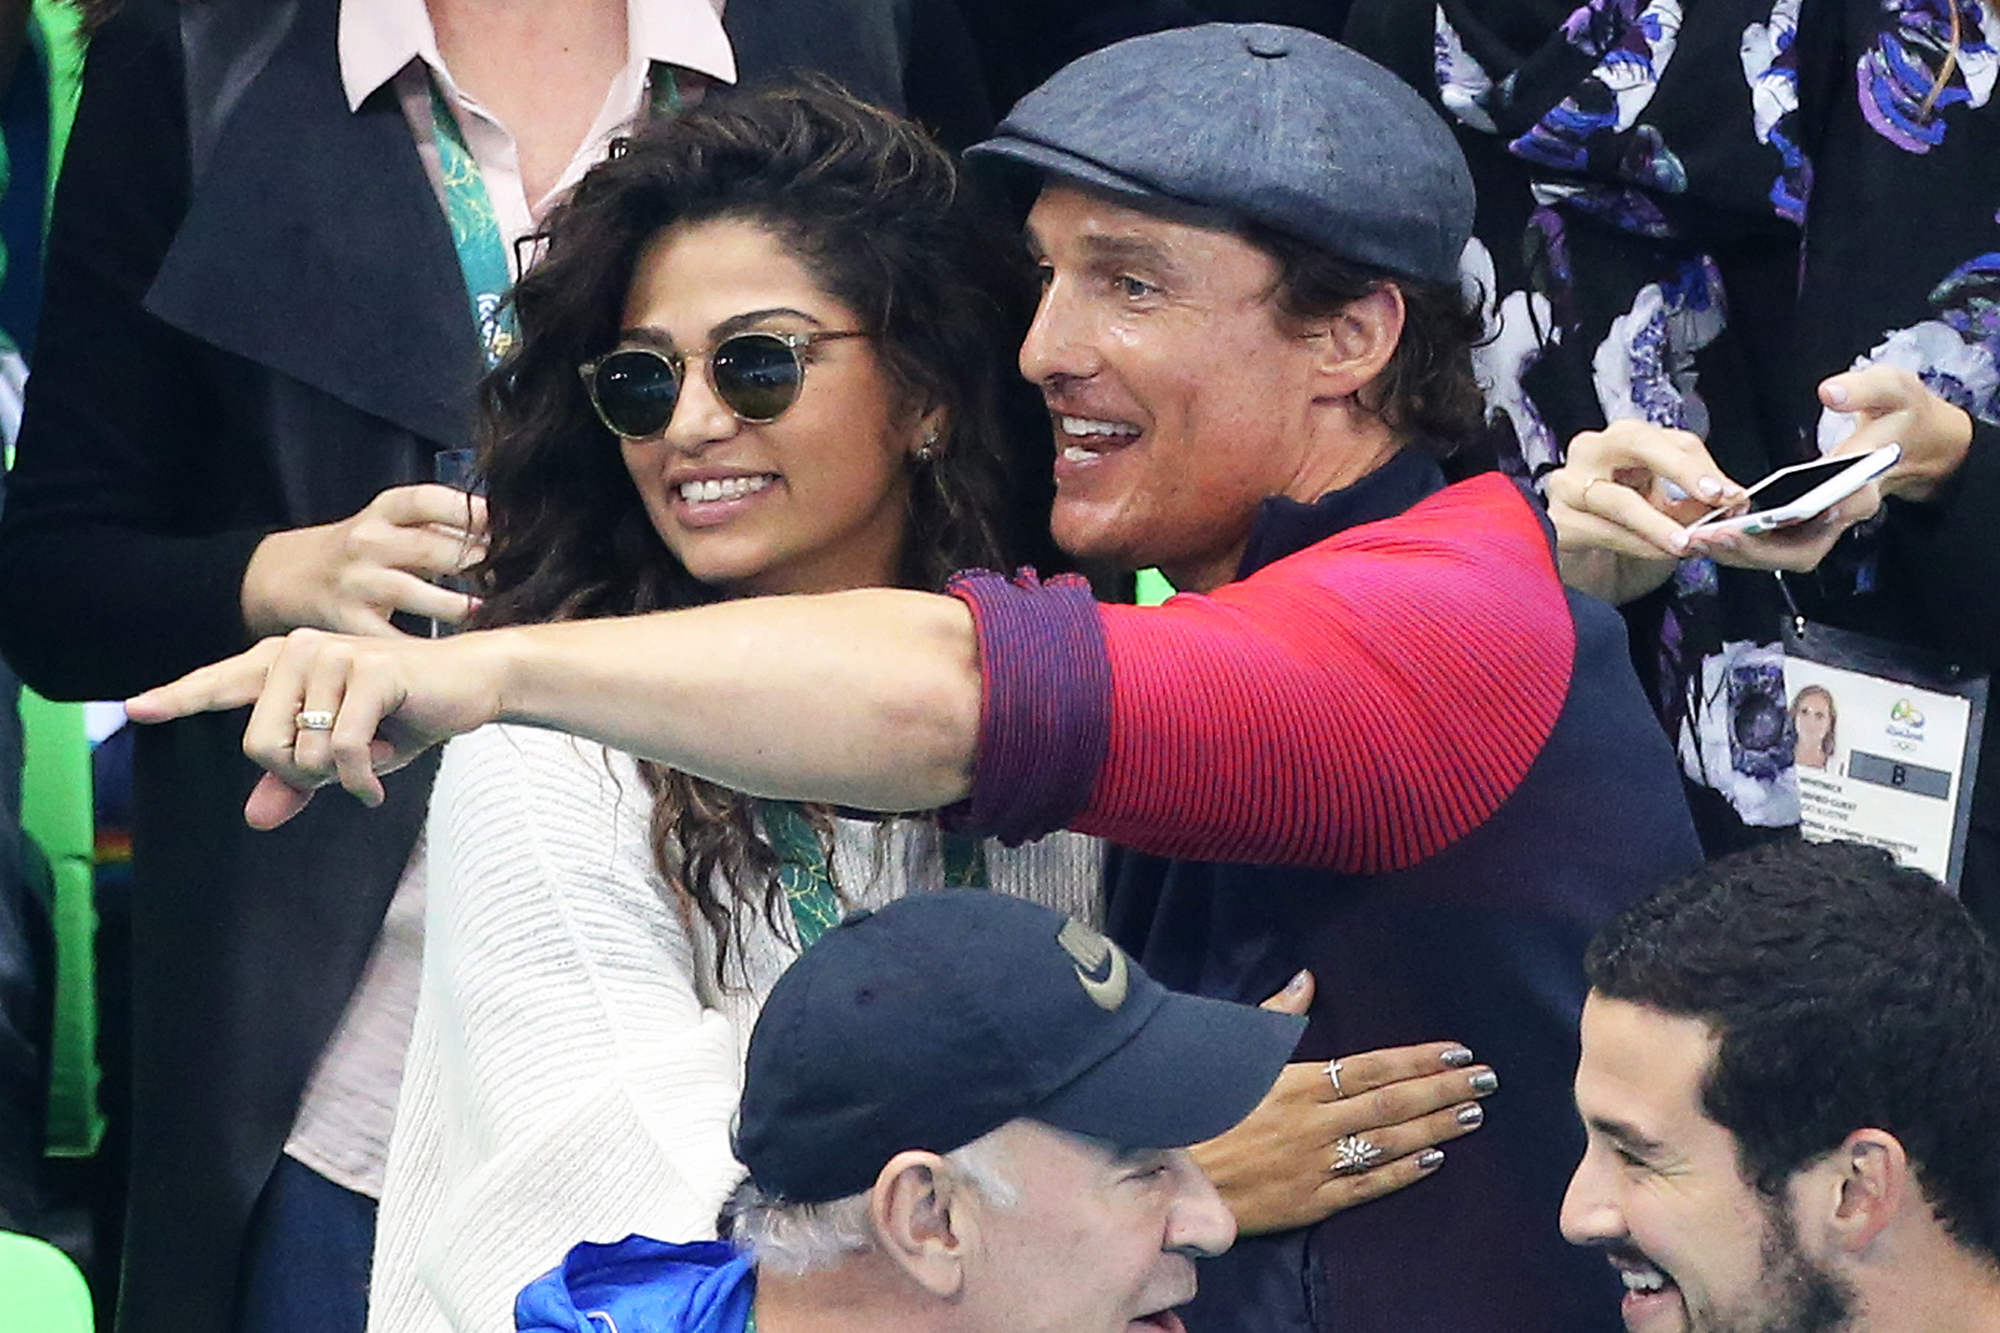 Matthew McConaughey and Camila Alves attend the swimming finals on day 5 of the Rio 2016 Olympic Games, on Aug. 10, 2016 in Rio de Janeiro, Brazil.